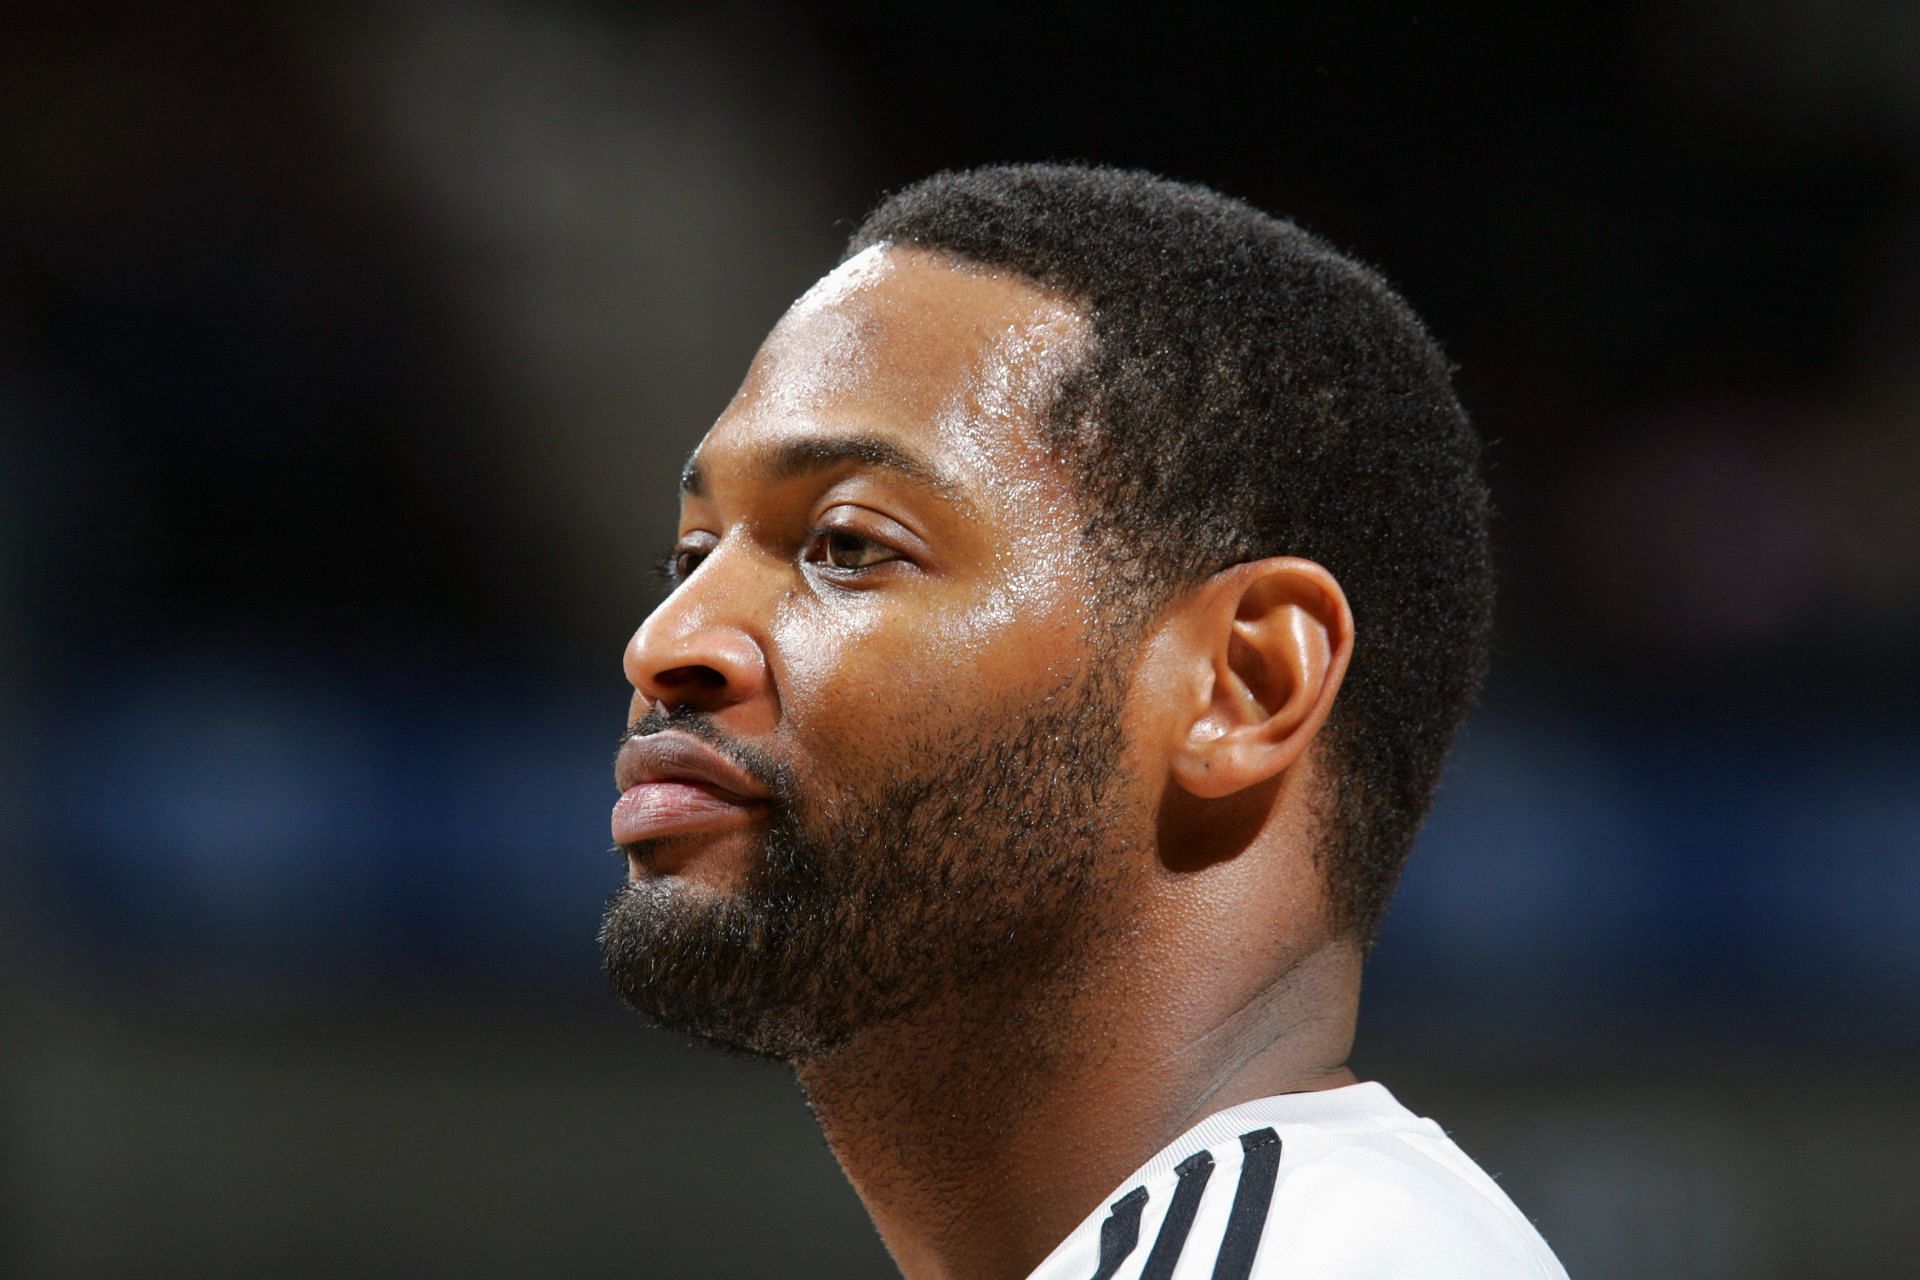 Robert Horry won seven rings during his 16-year career.